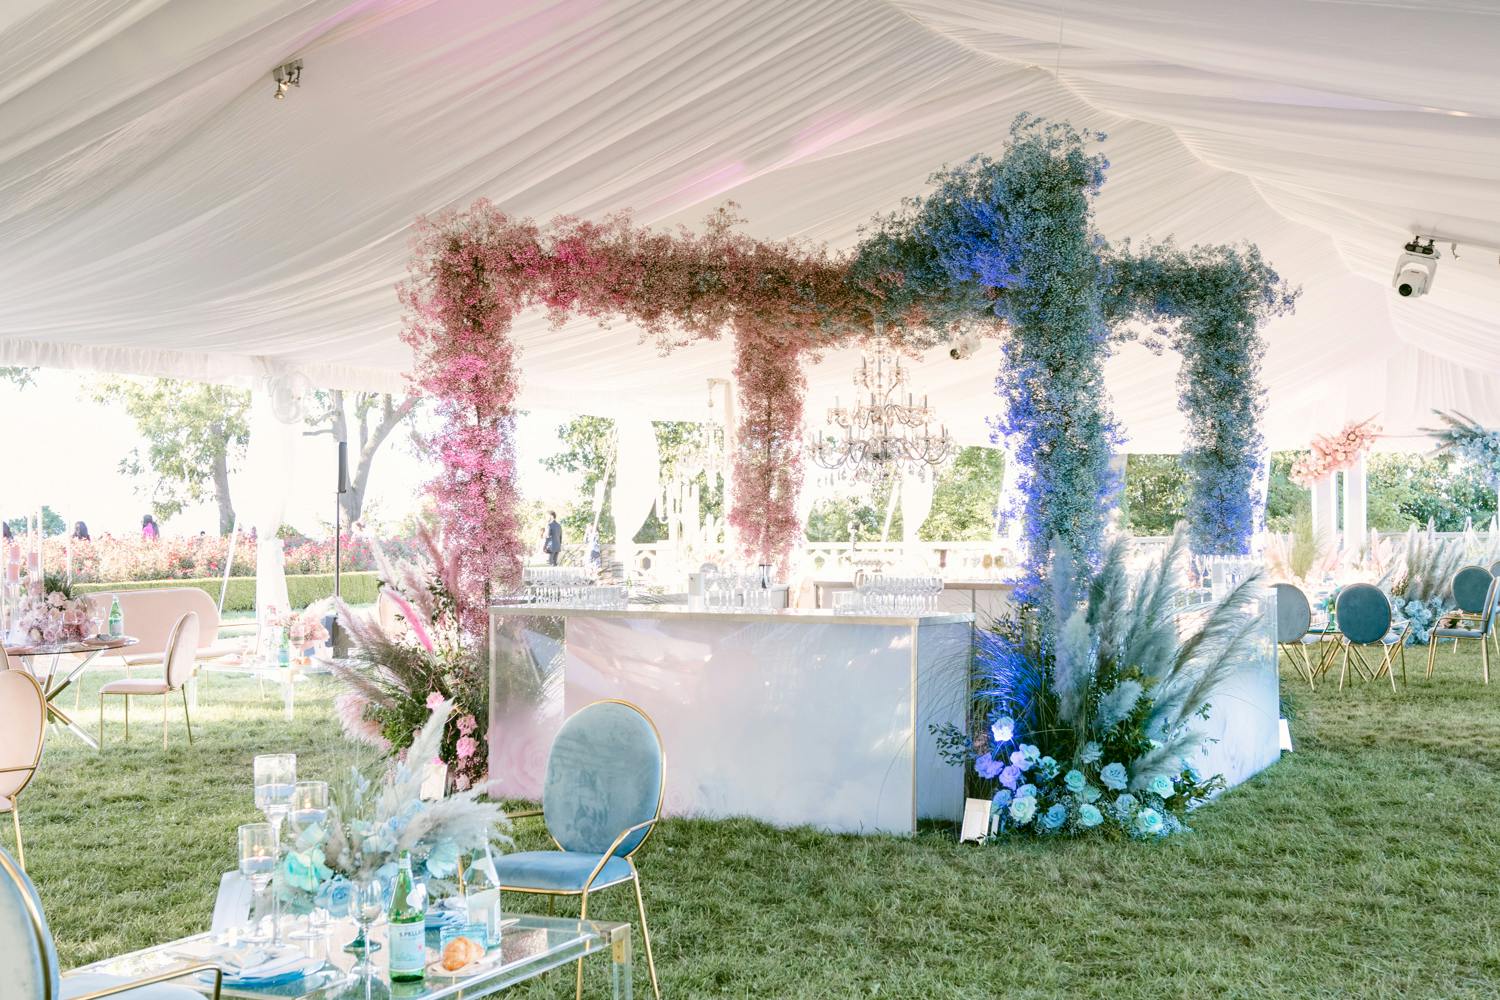 White Wedding Tent With Grass Lawn, White Iridescent Bar Area, and Pink and Blue Baby’s Breath Installation | PartySlate